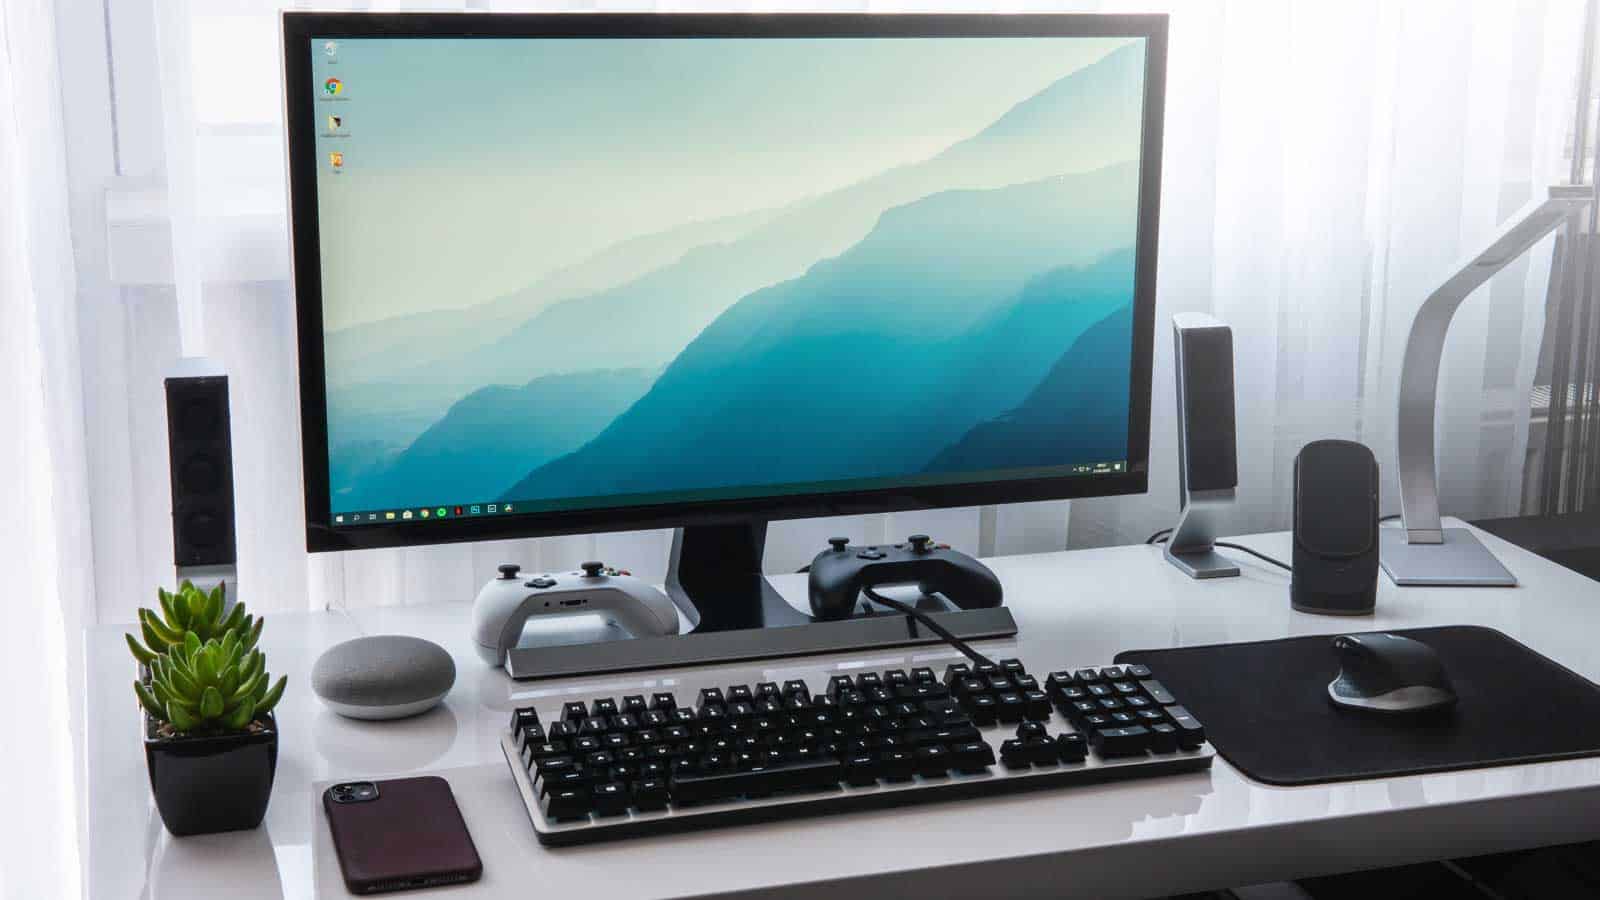 What Does An Ergonomic Desk Look Like?